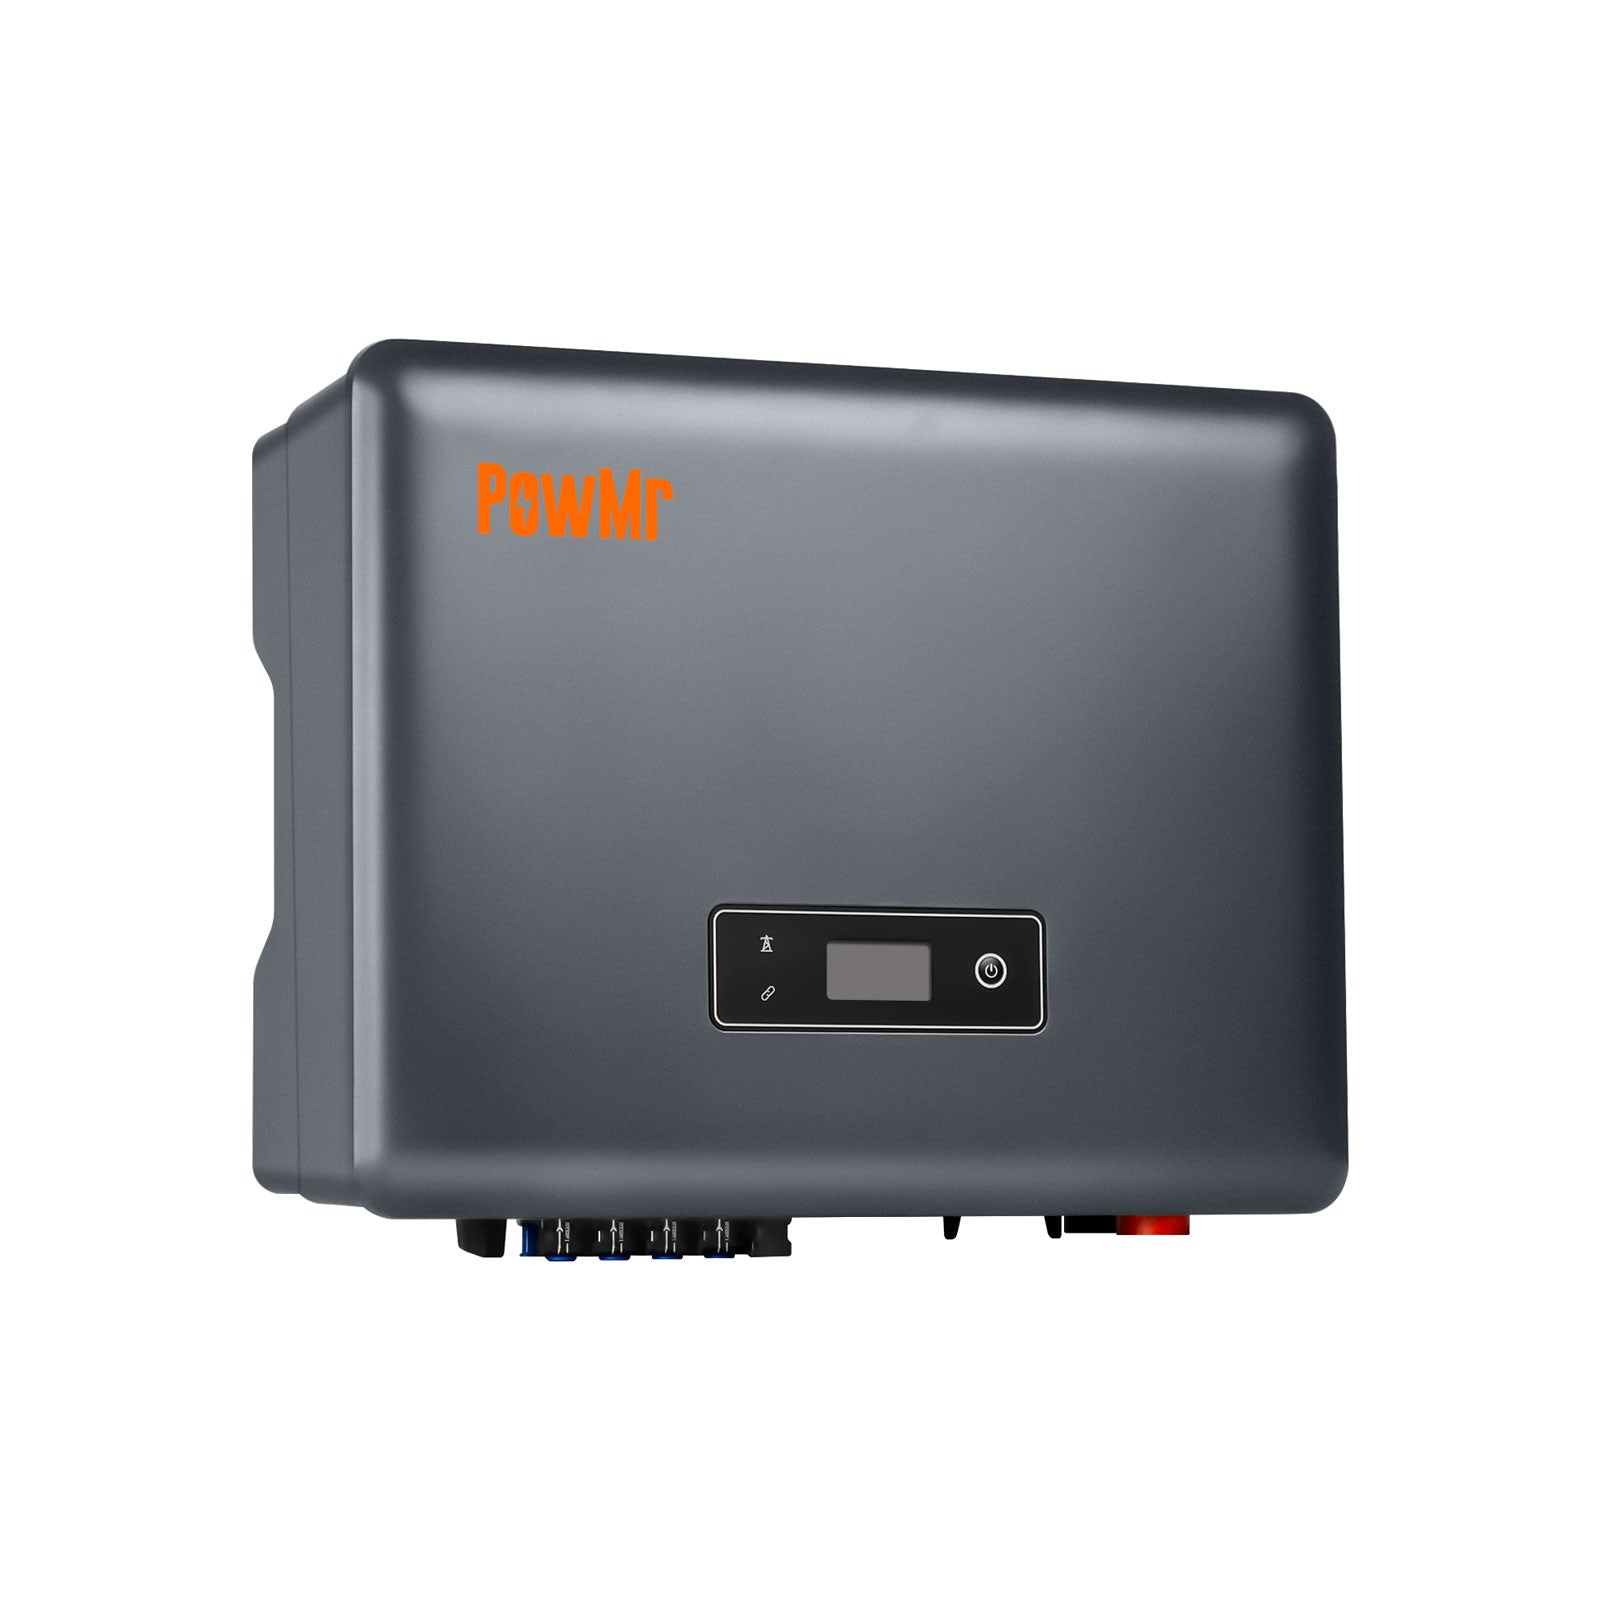 SOLXPOW X3 Series 20KW Three-Phase HV Battery 2 MPPTs Commercial Storage Inverter